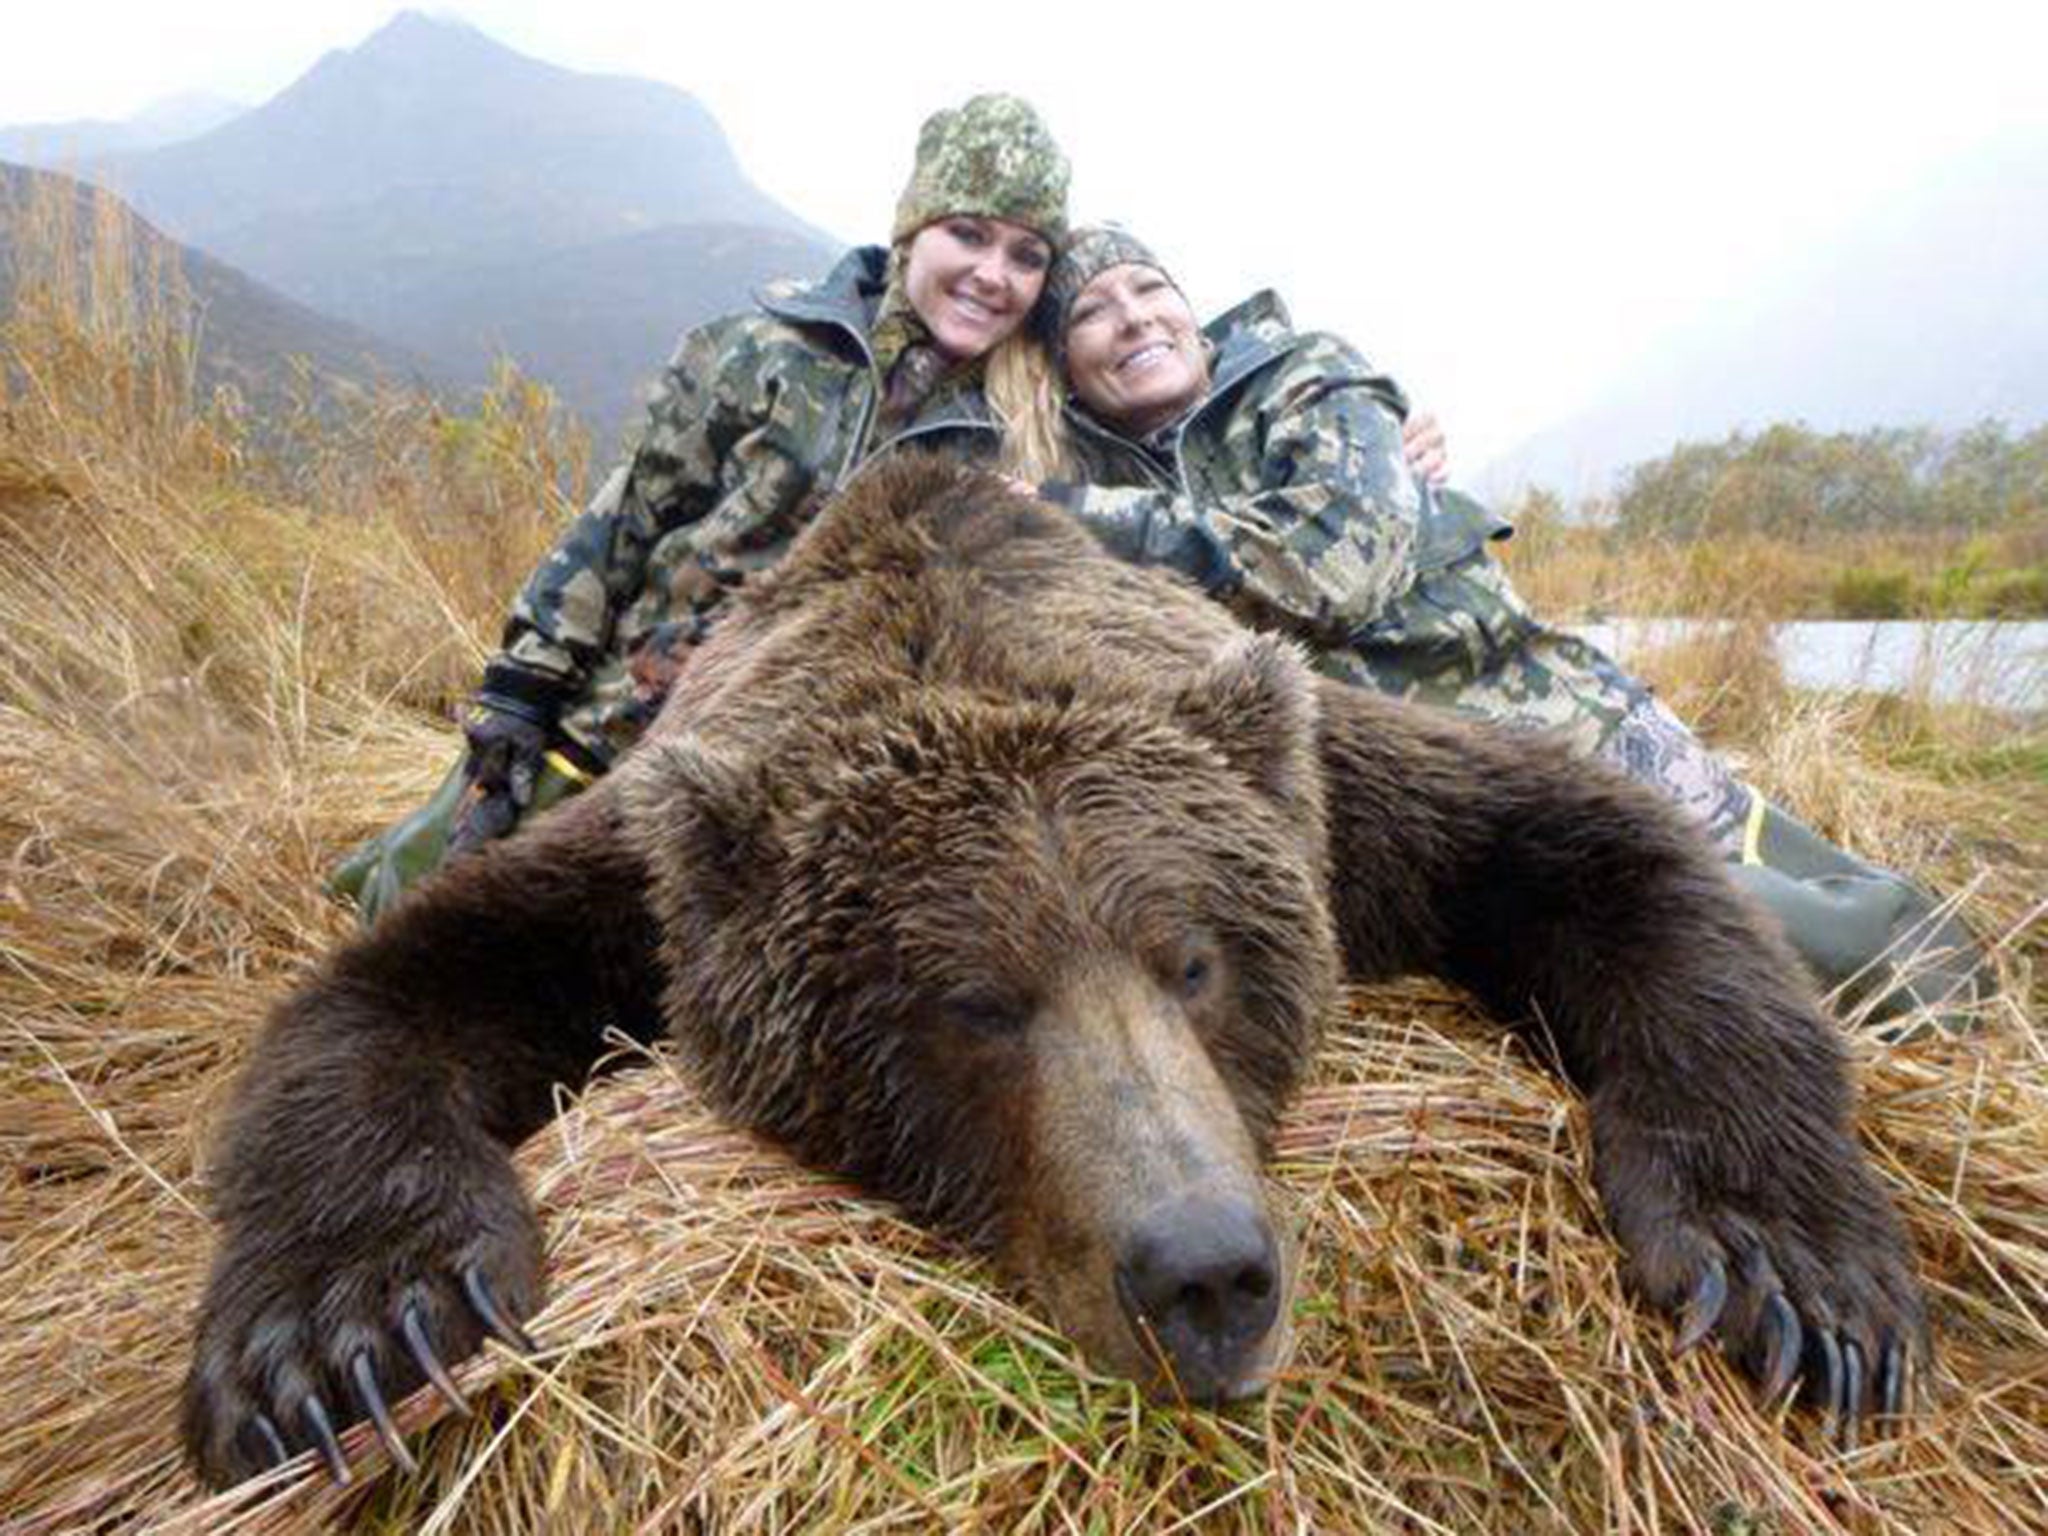 Rebecca Francis Receives Barrage Of Death Threats Over Hunting Images The Independent